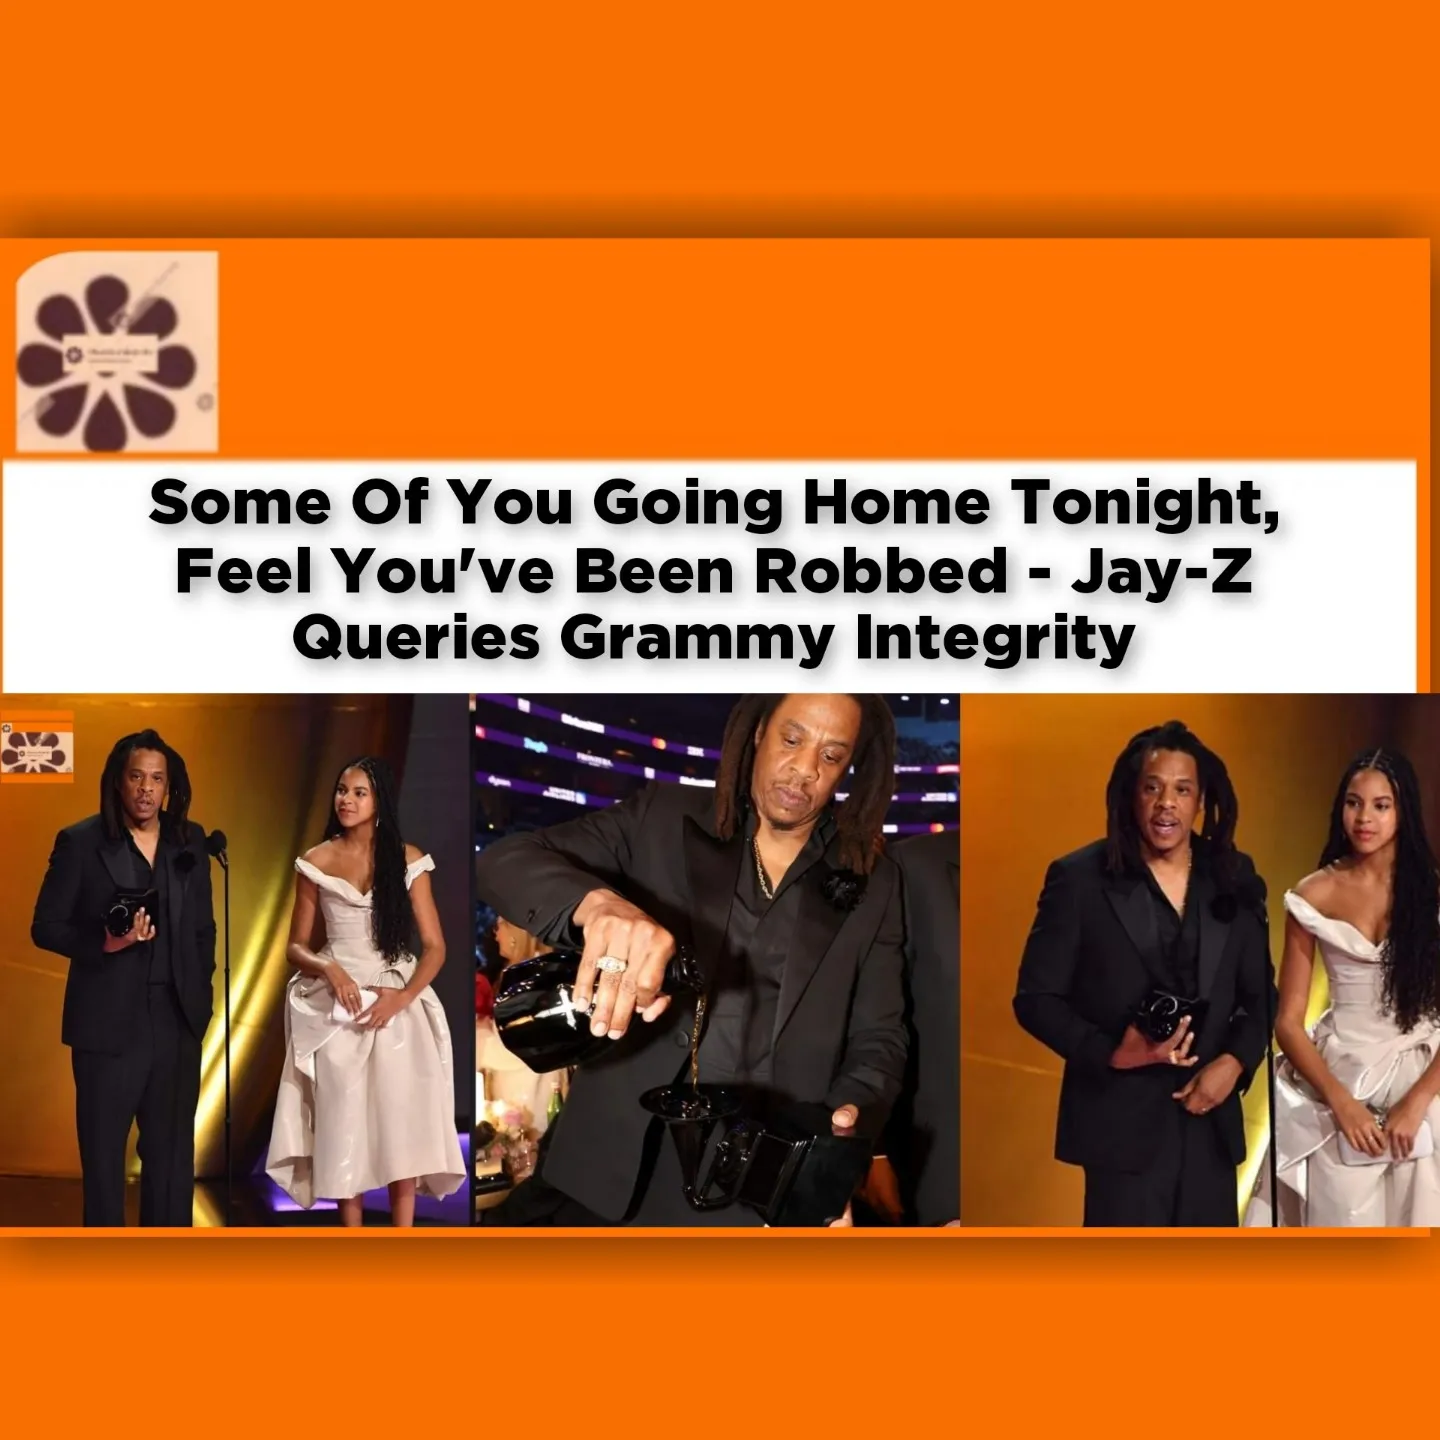 Some Of You Going Home Tonight, Feel You've Been Robbed - Jay-Z Queries Grammy Integrity ~ OsazuwaAkonedo #AOTY #Beyonce #grammy #JayZ